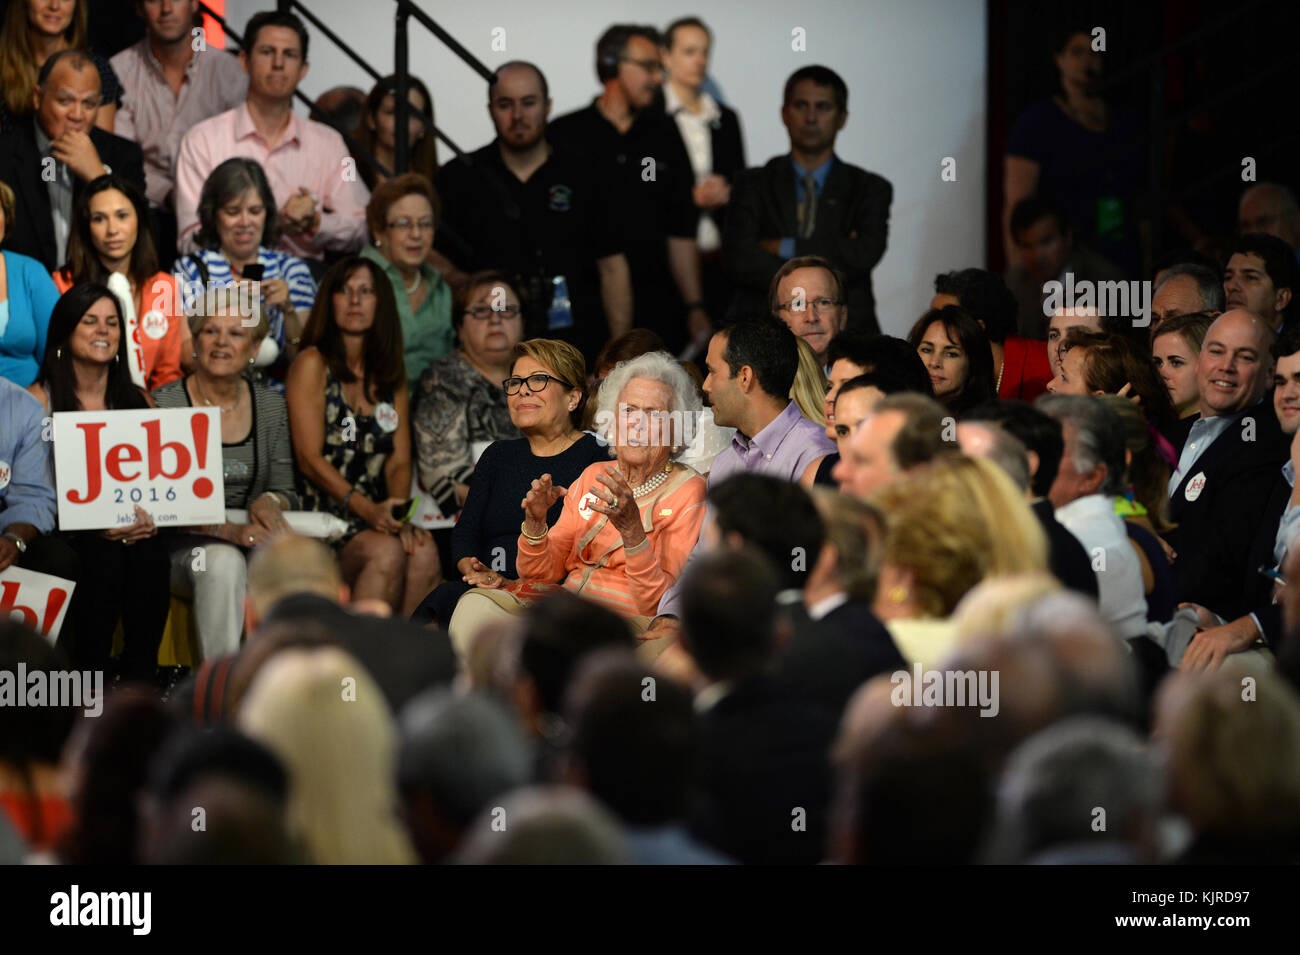 MIAMI, FL - JUNE 15: Former Florida Governor Jeb Bush on stage to announce his candidacy for the 2016 Republican presidential nomination at Miami Dade College - Kendall Campus Theodore Gibson Health Center (Gymnasium) June 15, 2015 in Miami, Florida. John Ellis 'Jeb' Bush will attempt to follow his brother and father into the nation's highest office when he officially announces today that he'll run for president of the United States   People:  Barbara Bush, George P. Bush Stock Photo